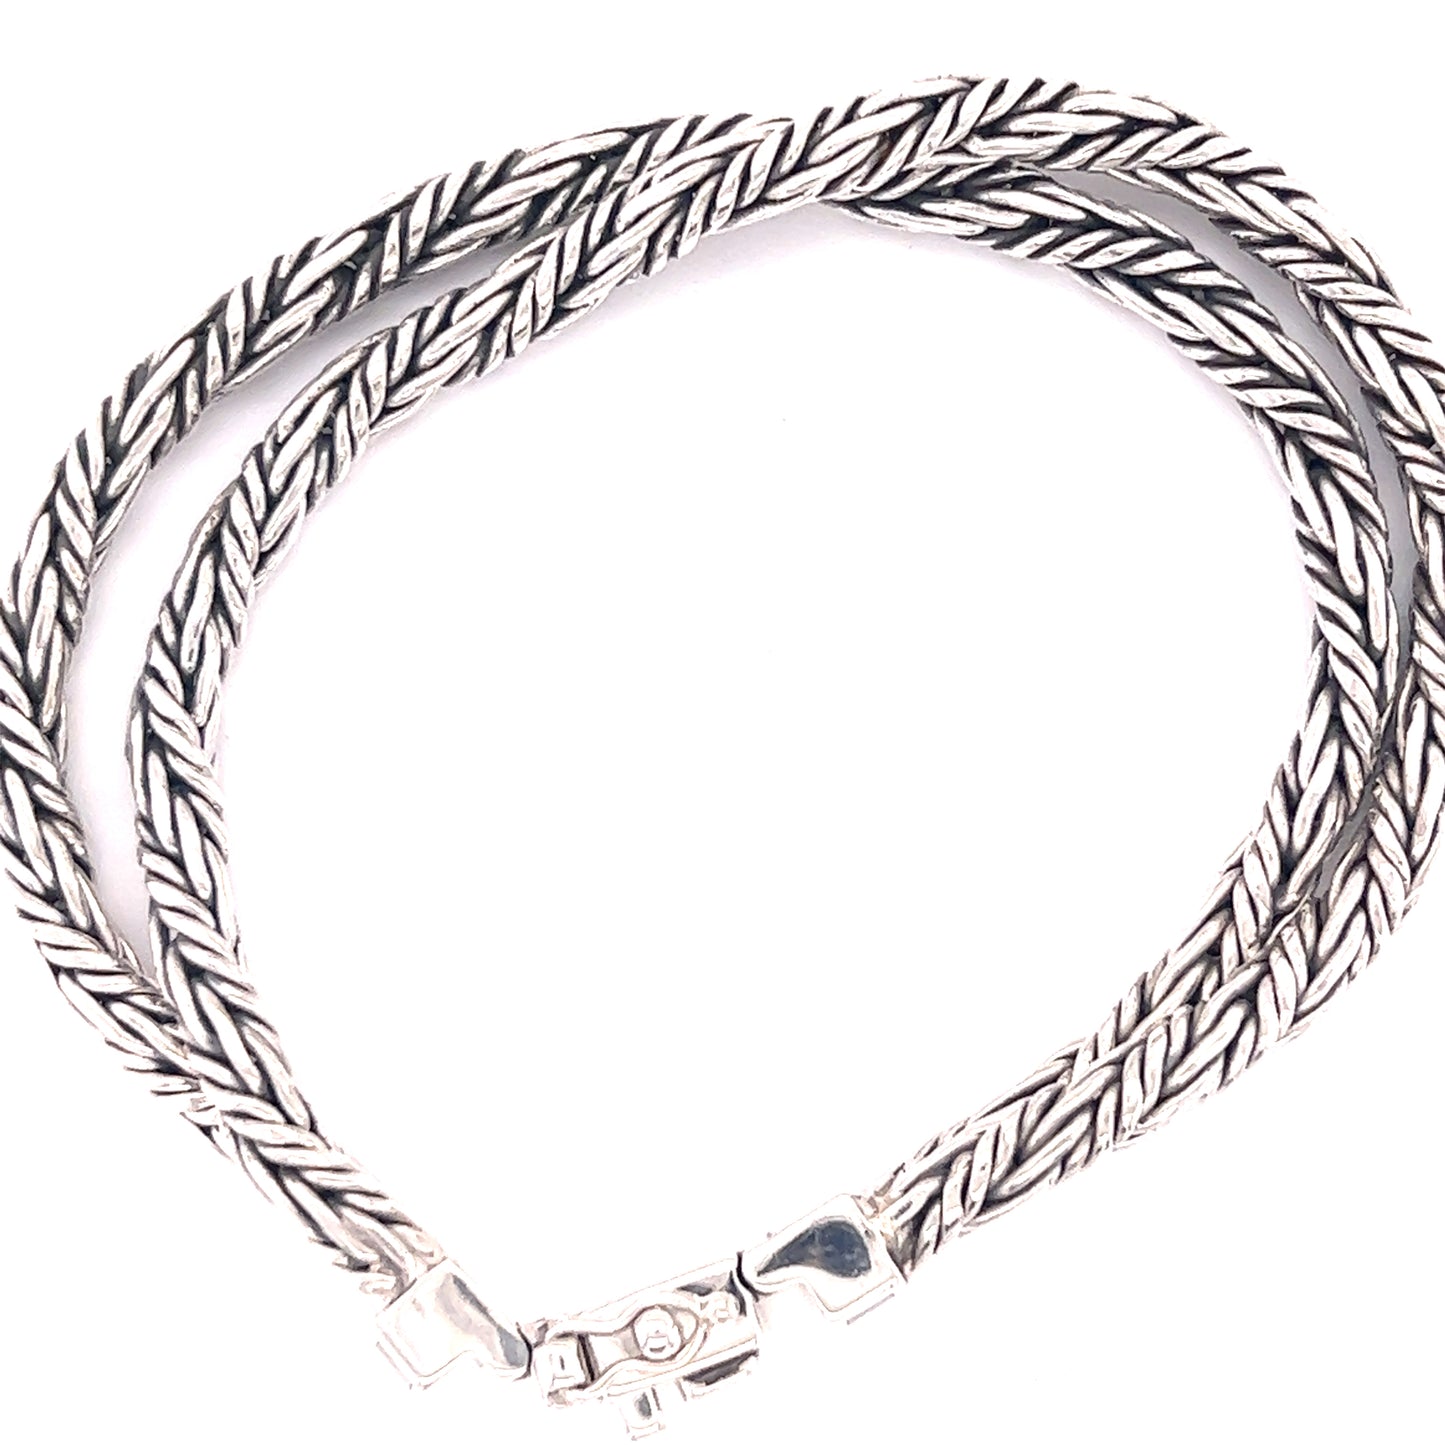 A Double Twisted Braided Rope Bracelet made of .925 Sterling Silver on a white background by Super Silver.